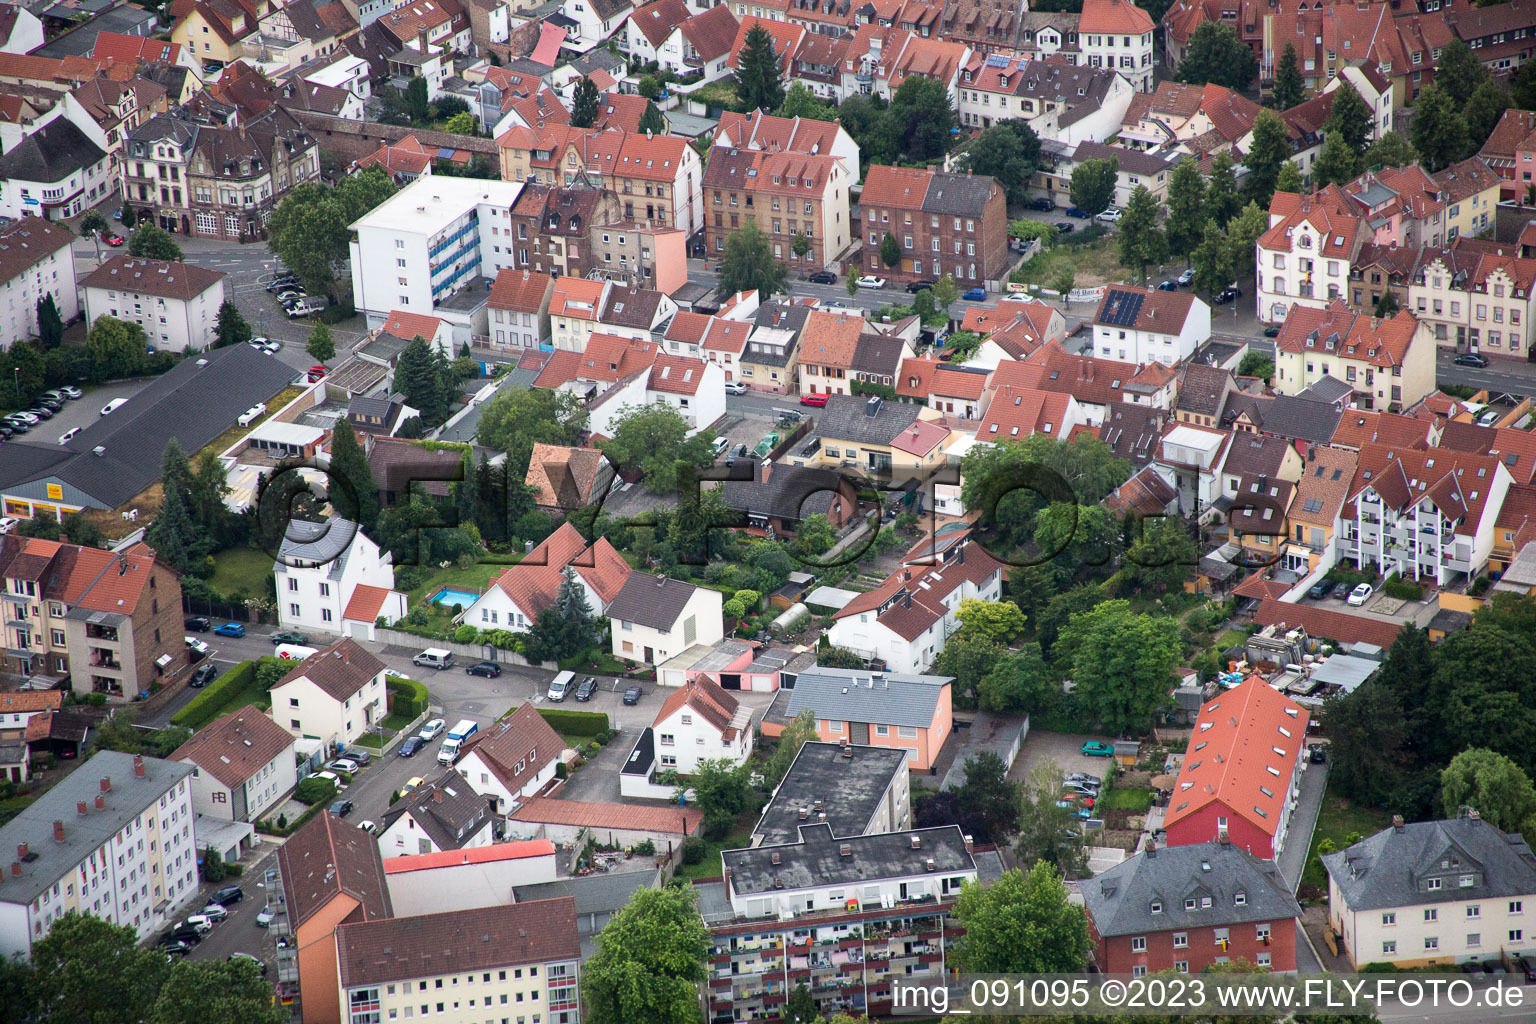 Worms in the state Rhineland-Palatinate, Germany seen from a drone